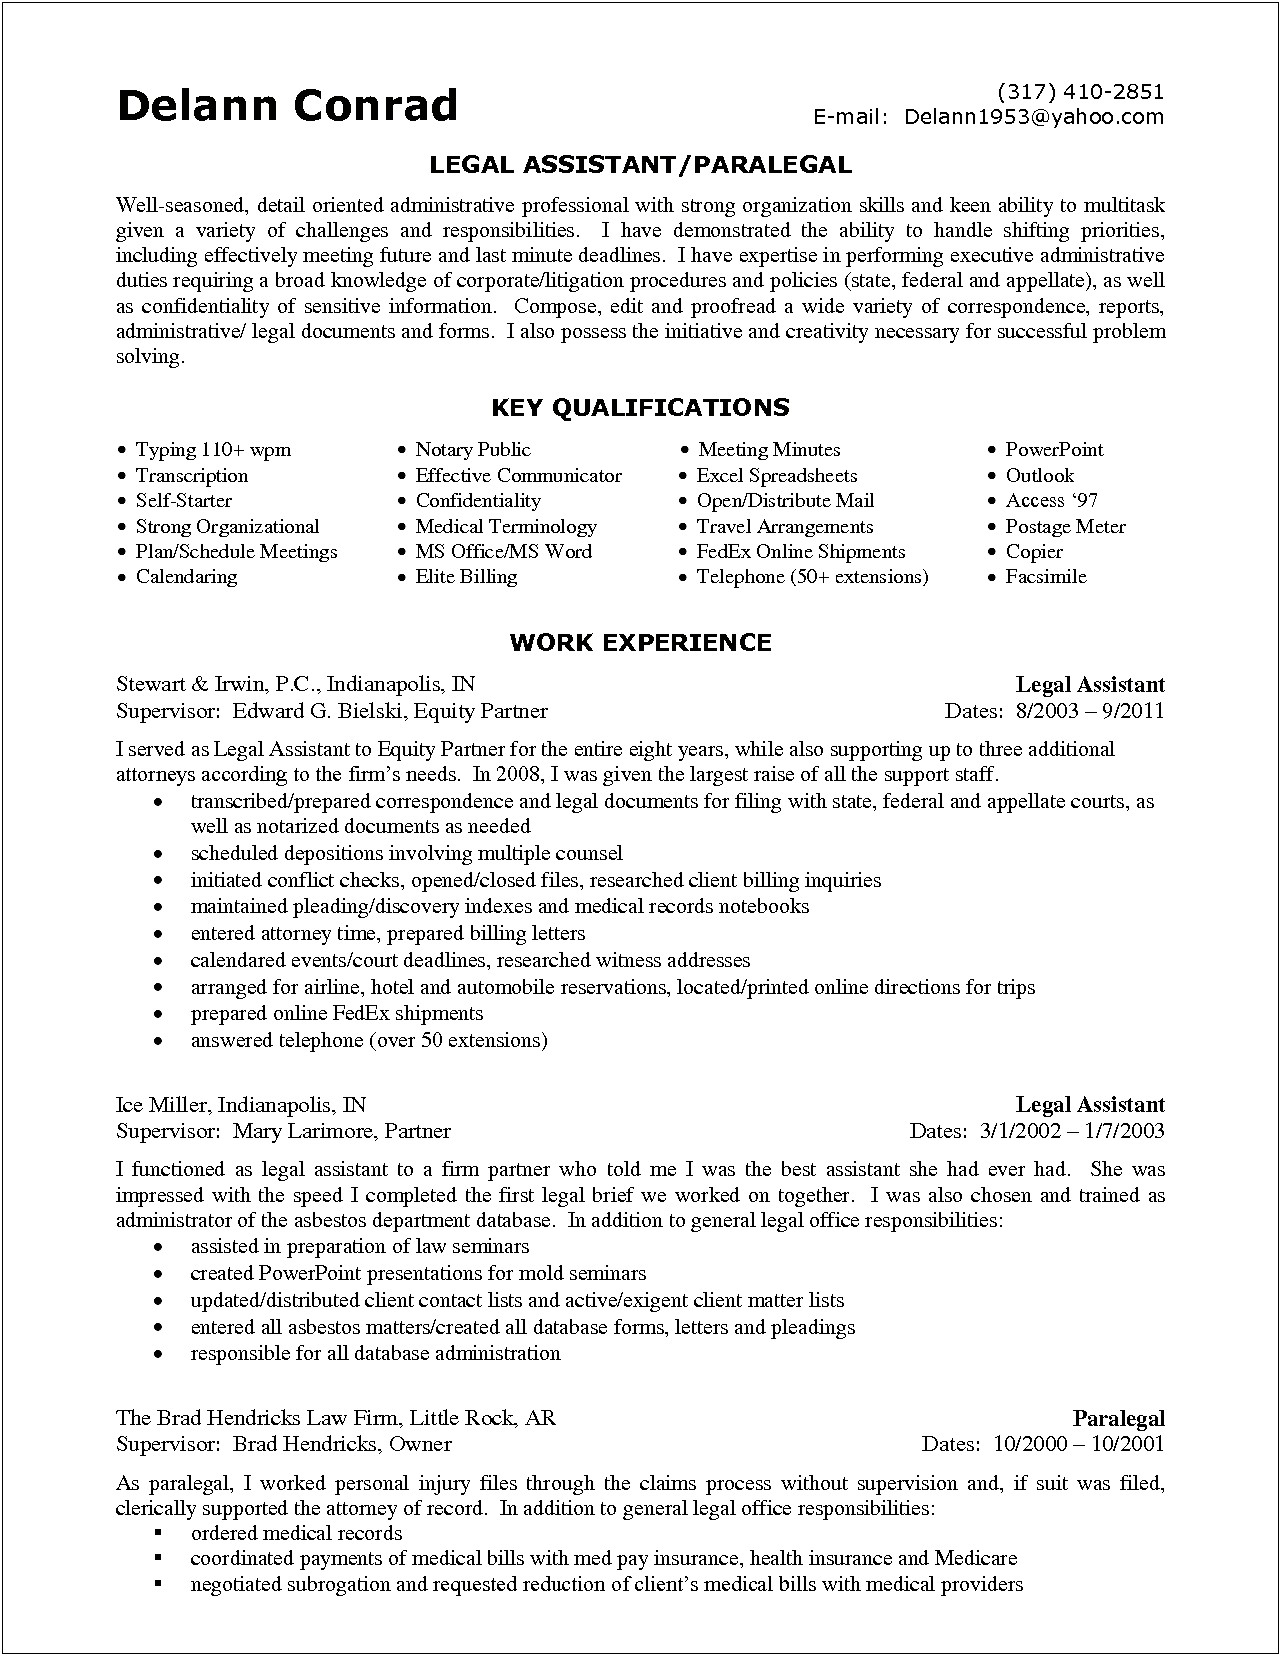 Resume Objective For Legal Administrative Assistant